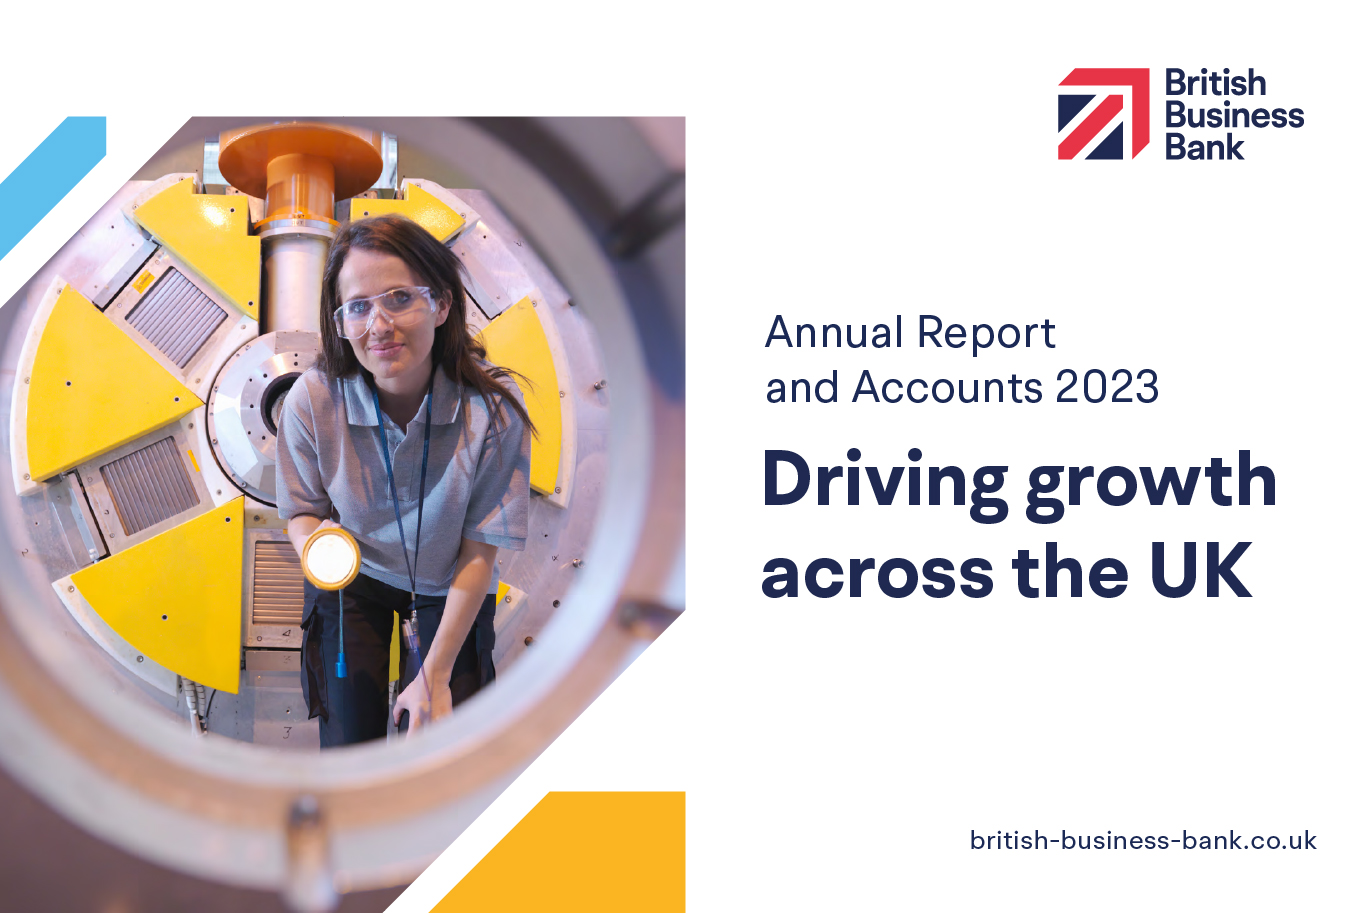 Annual Report and Accounts 2023, Driving growth across the UK